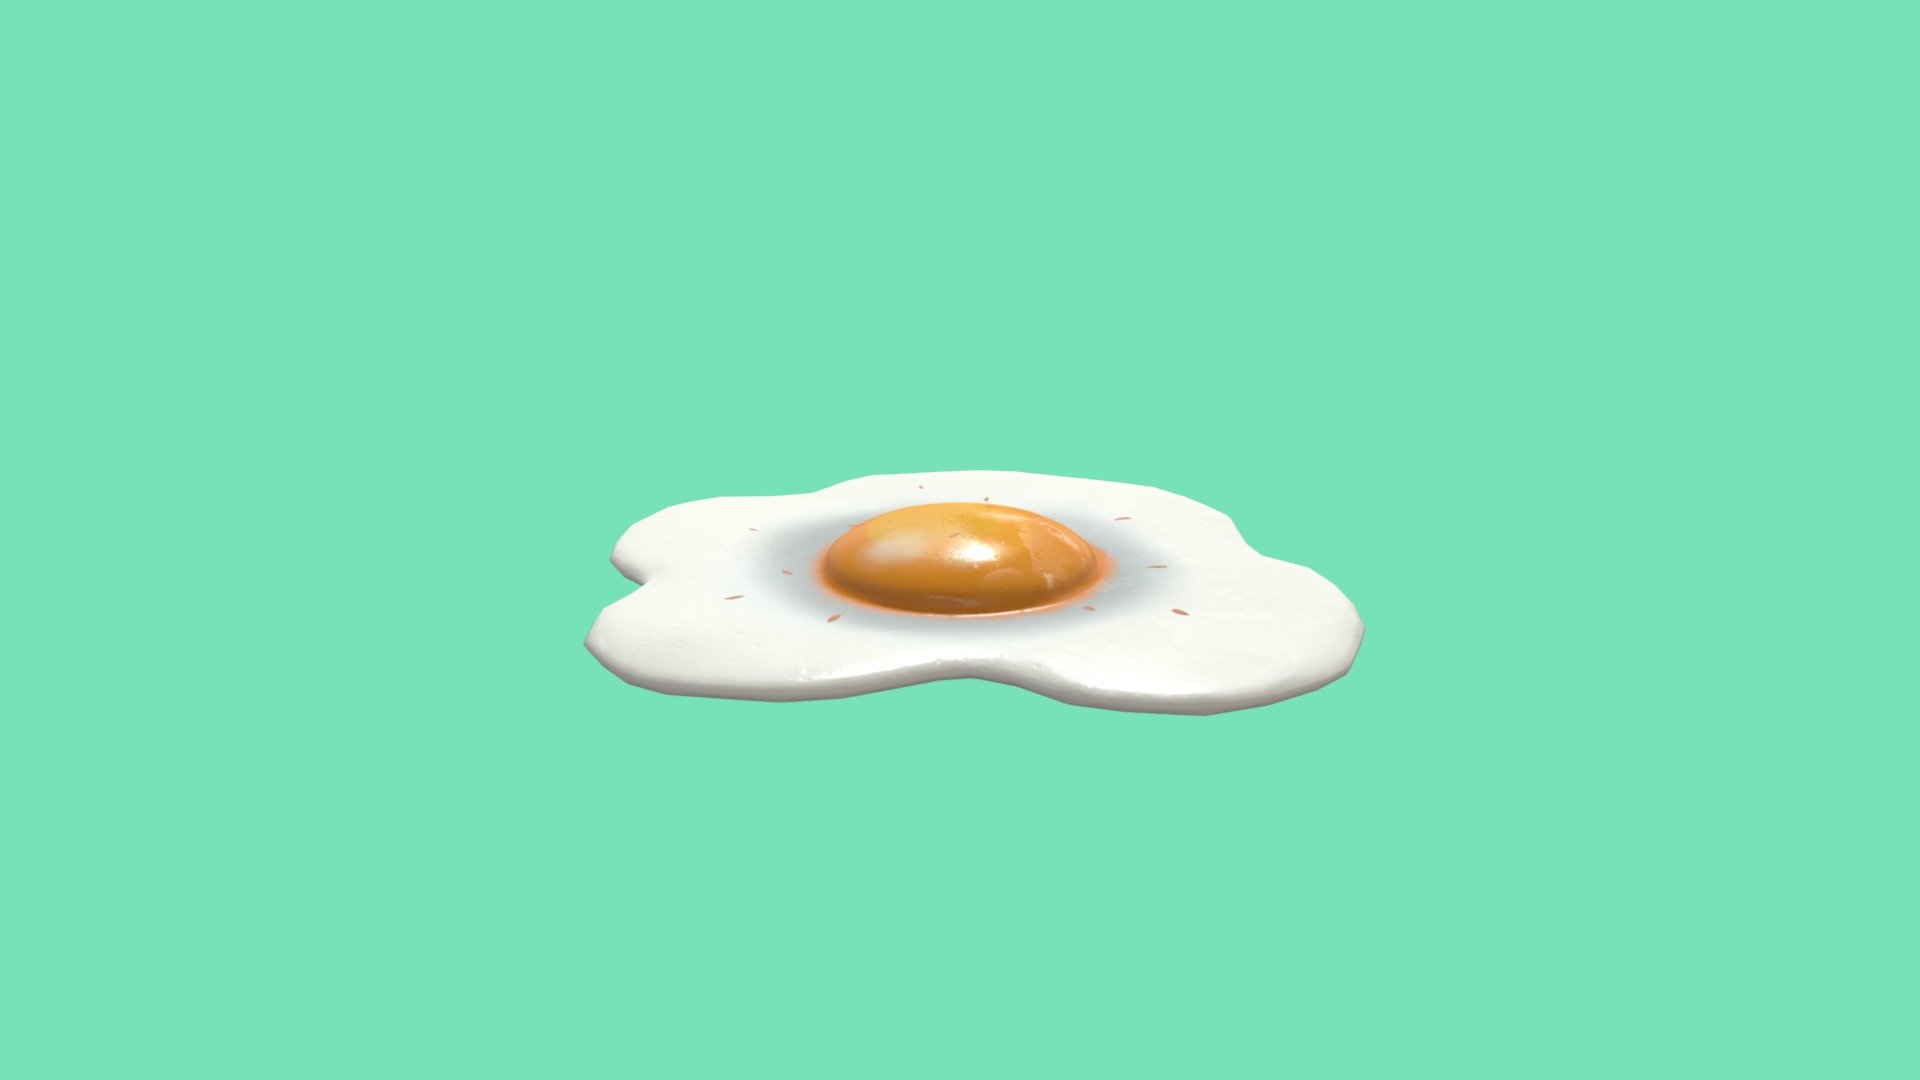 A single egg sitting on top of an image - Egg